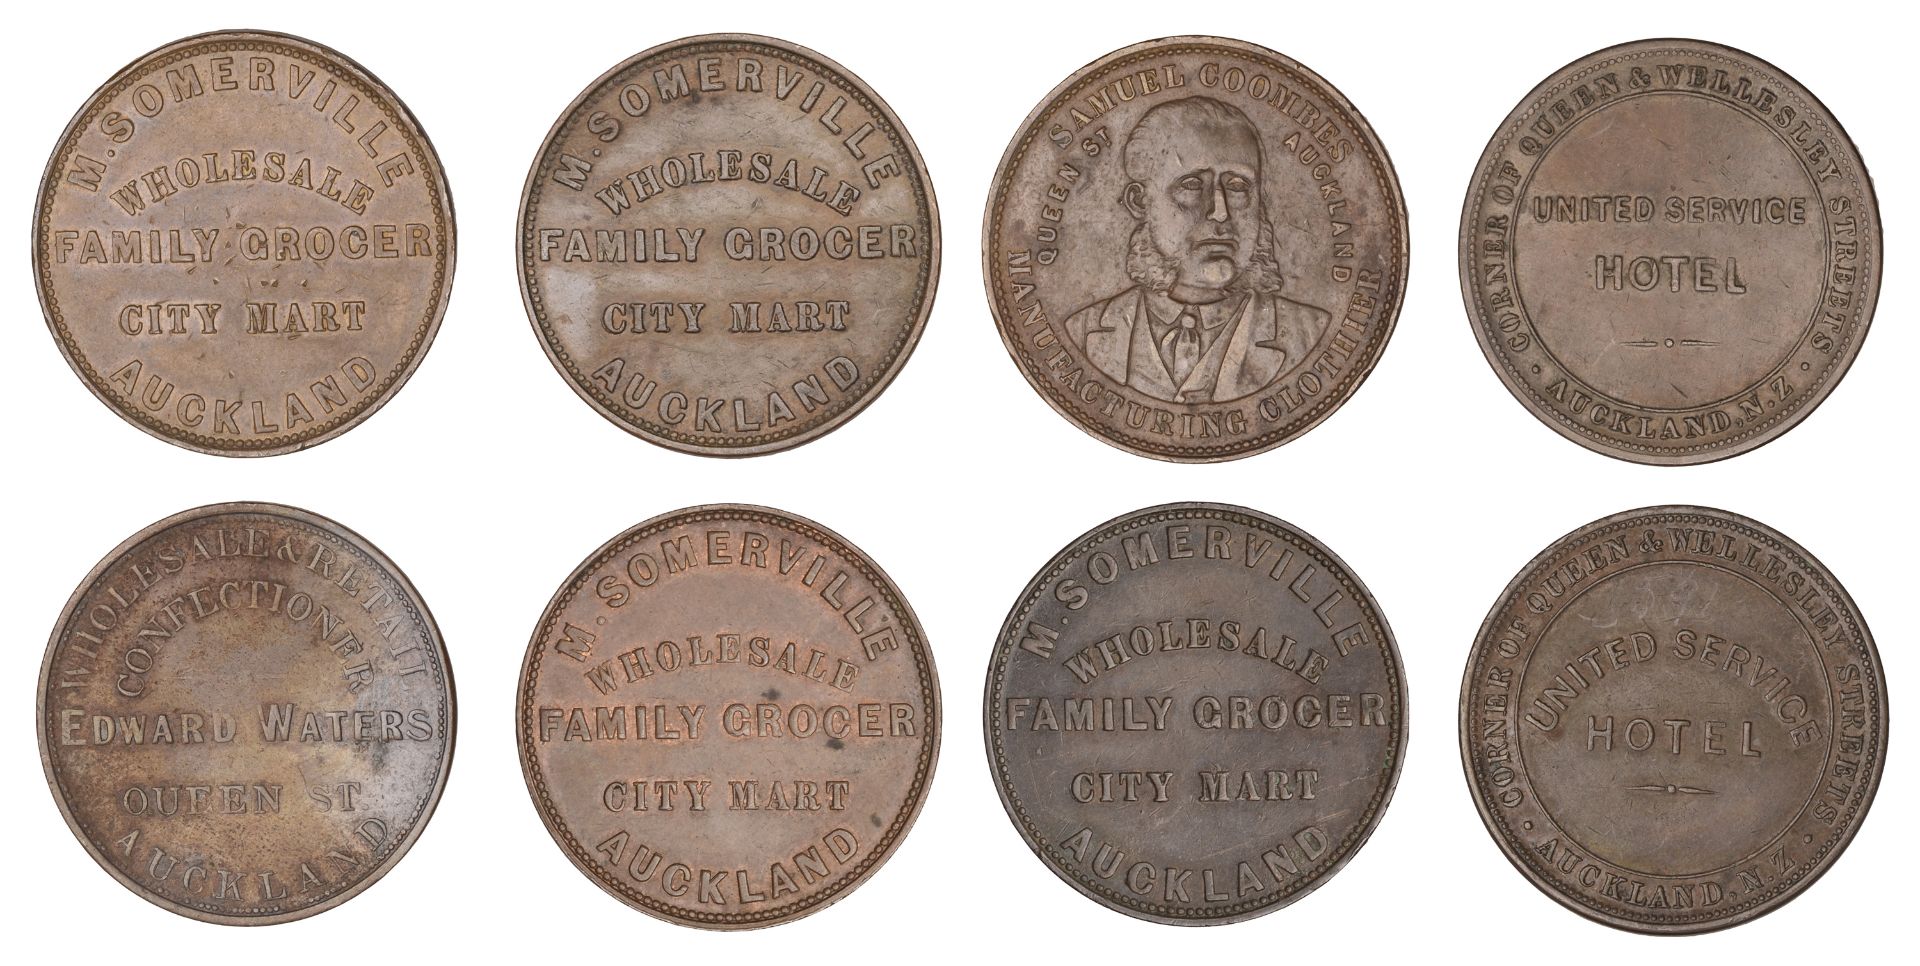 New Zealand, AUCKLAND, Samuel Coombes, Penny, undated (G 48a; A 77); M. Somerville, Pennies...